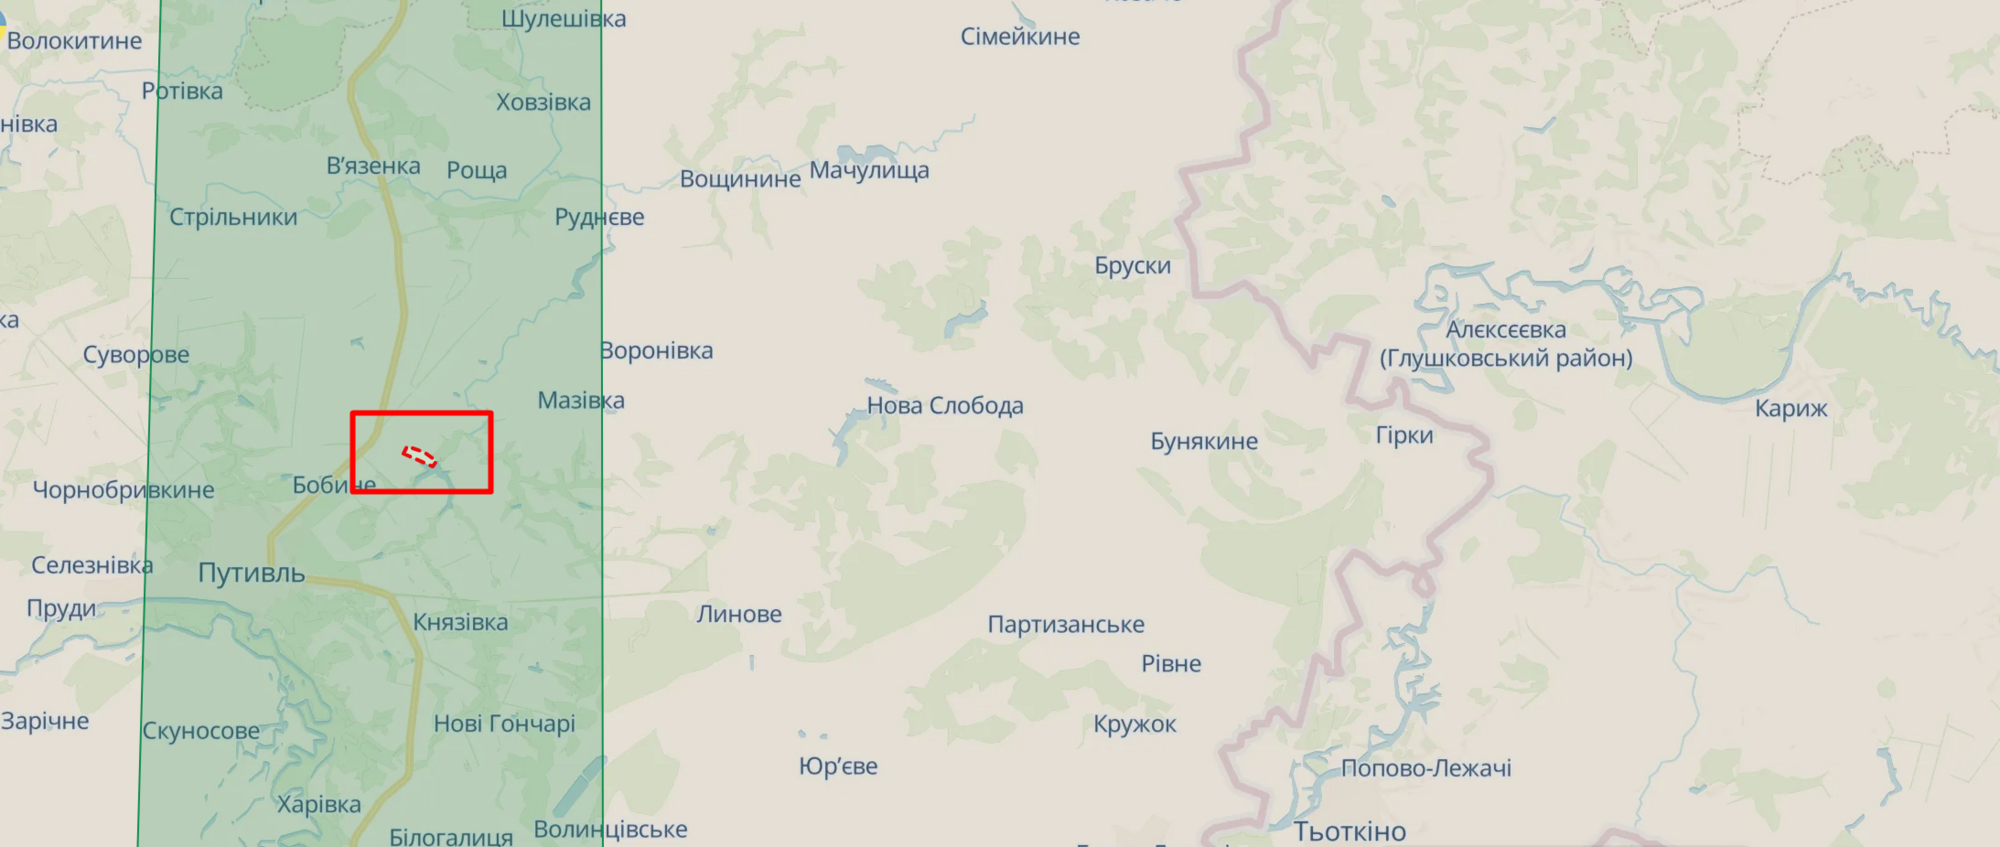 The occupants attack Sumy region in the morning, killing a family of 5. Details